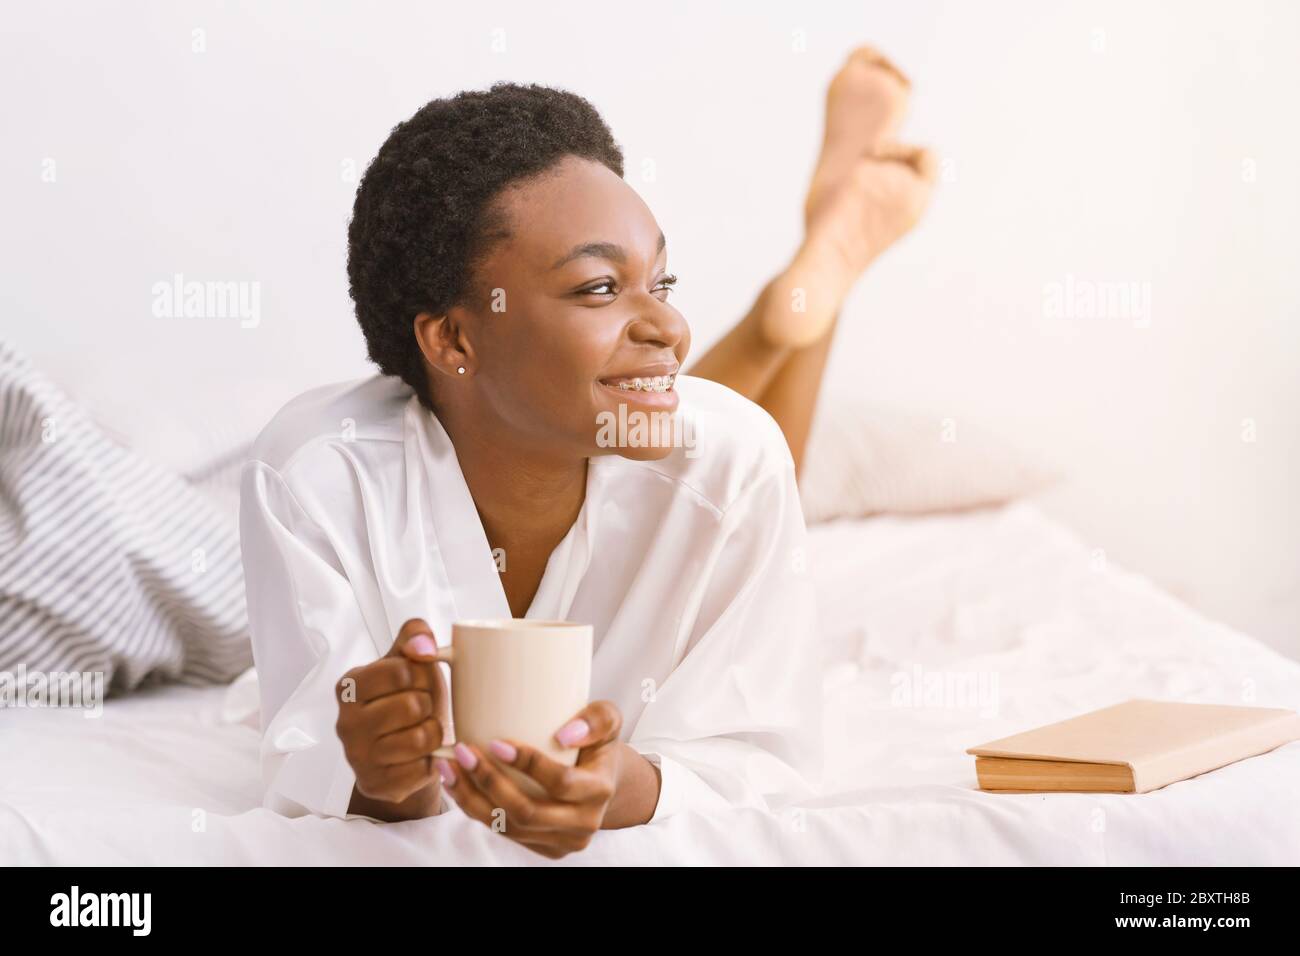 Good morning in comfortable bed. Smiling african american girl holding cup of coffee Stock Photo